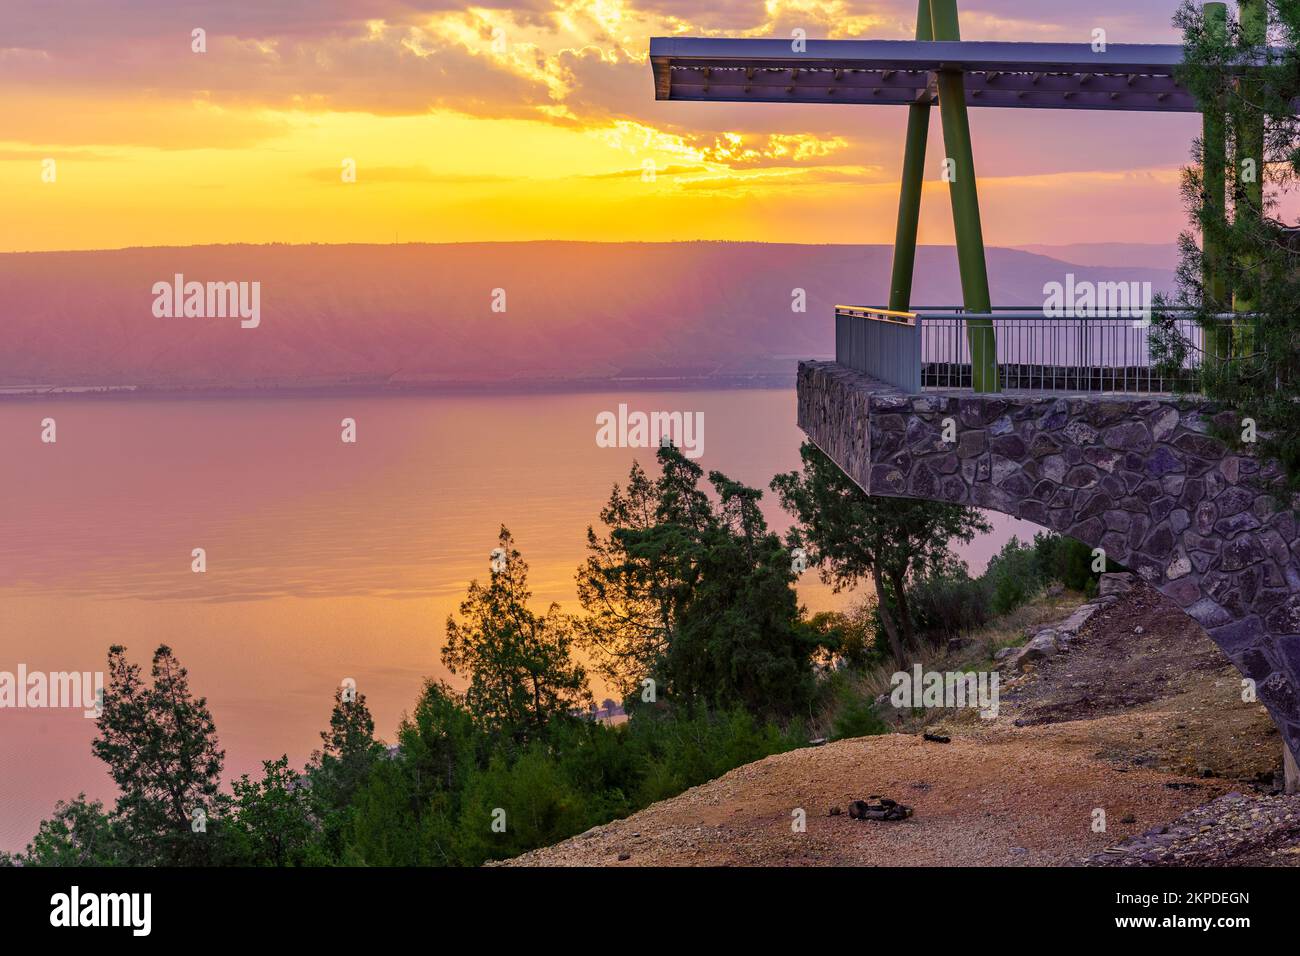 Sunrise view of the Sea of Galilee, with an observation deck, viewed from the west, northern Israel Stock Photo